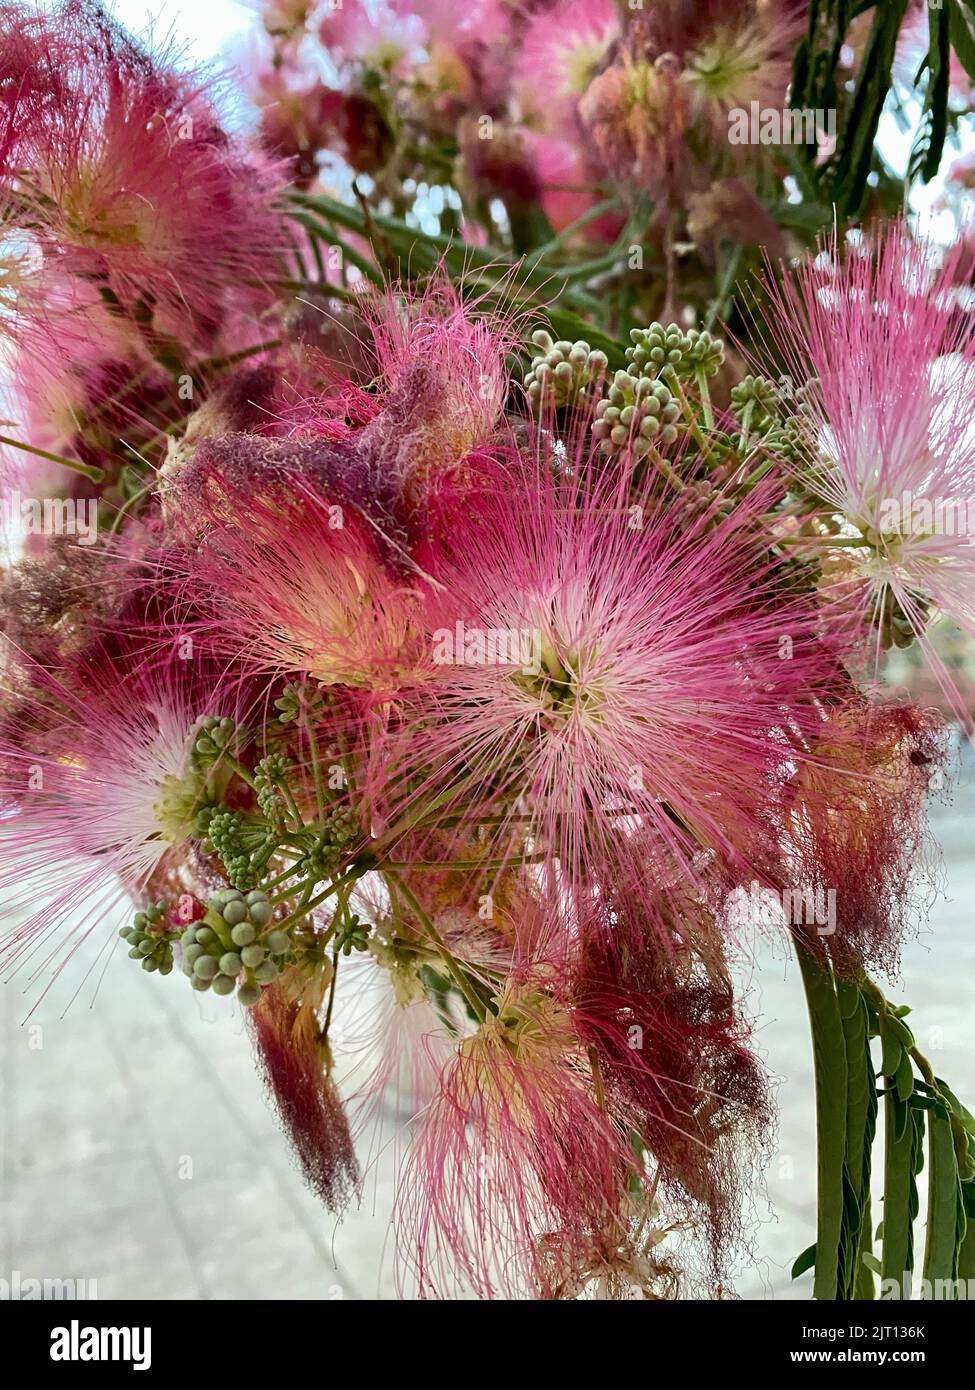 a Closeup shot of pink fluffy flowers of Persian silk tree - perfect for wallpapers Stock Photo